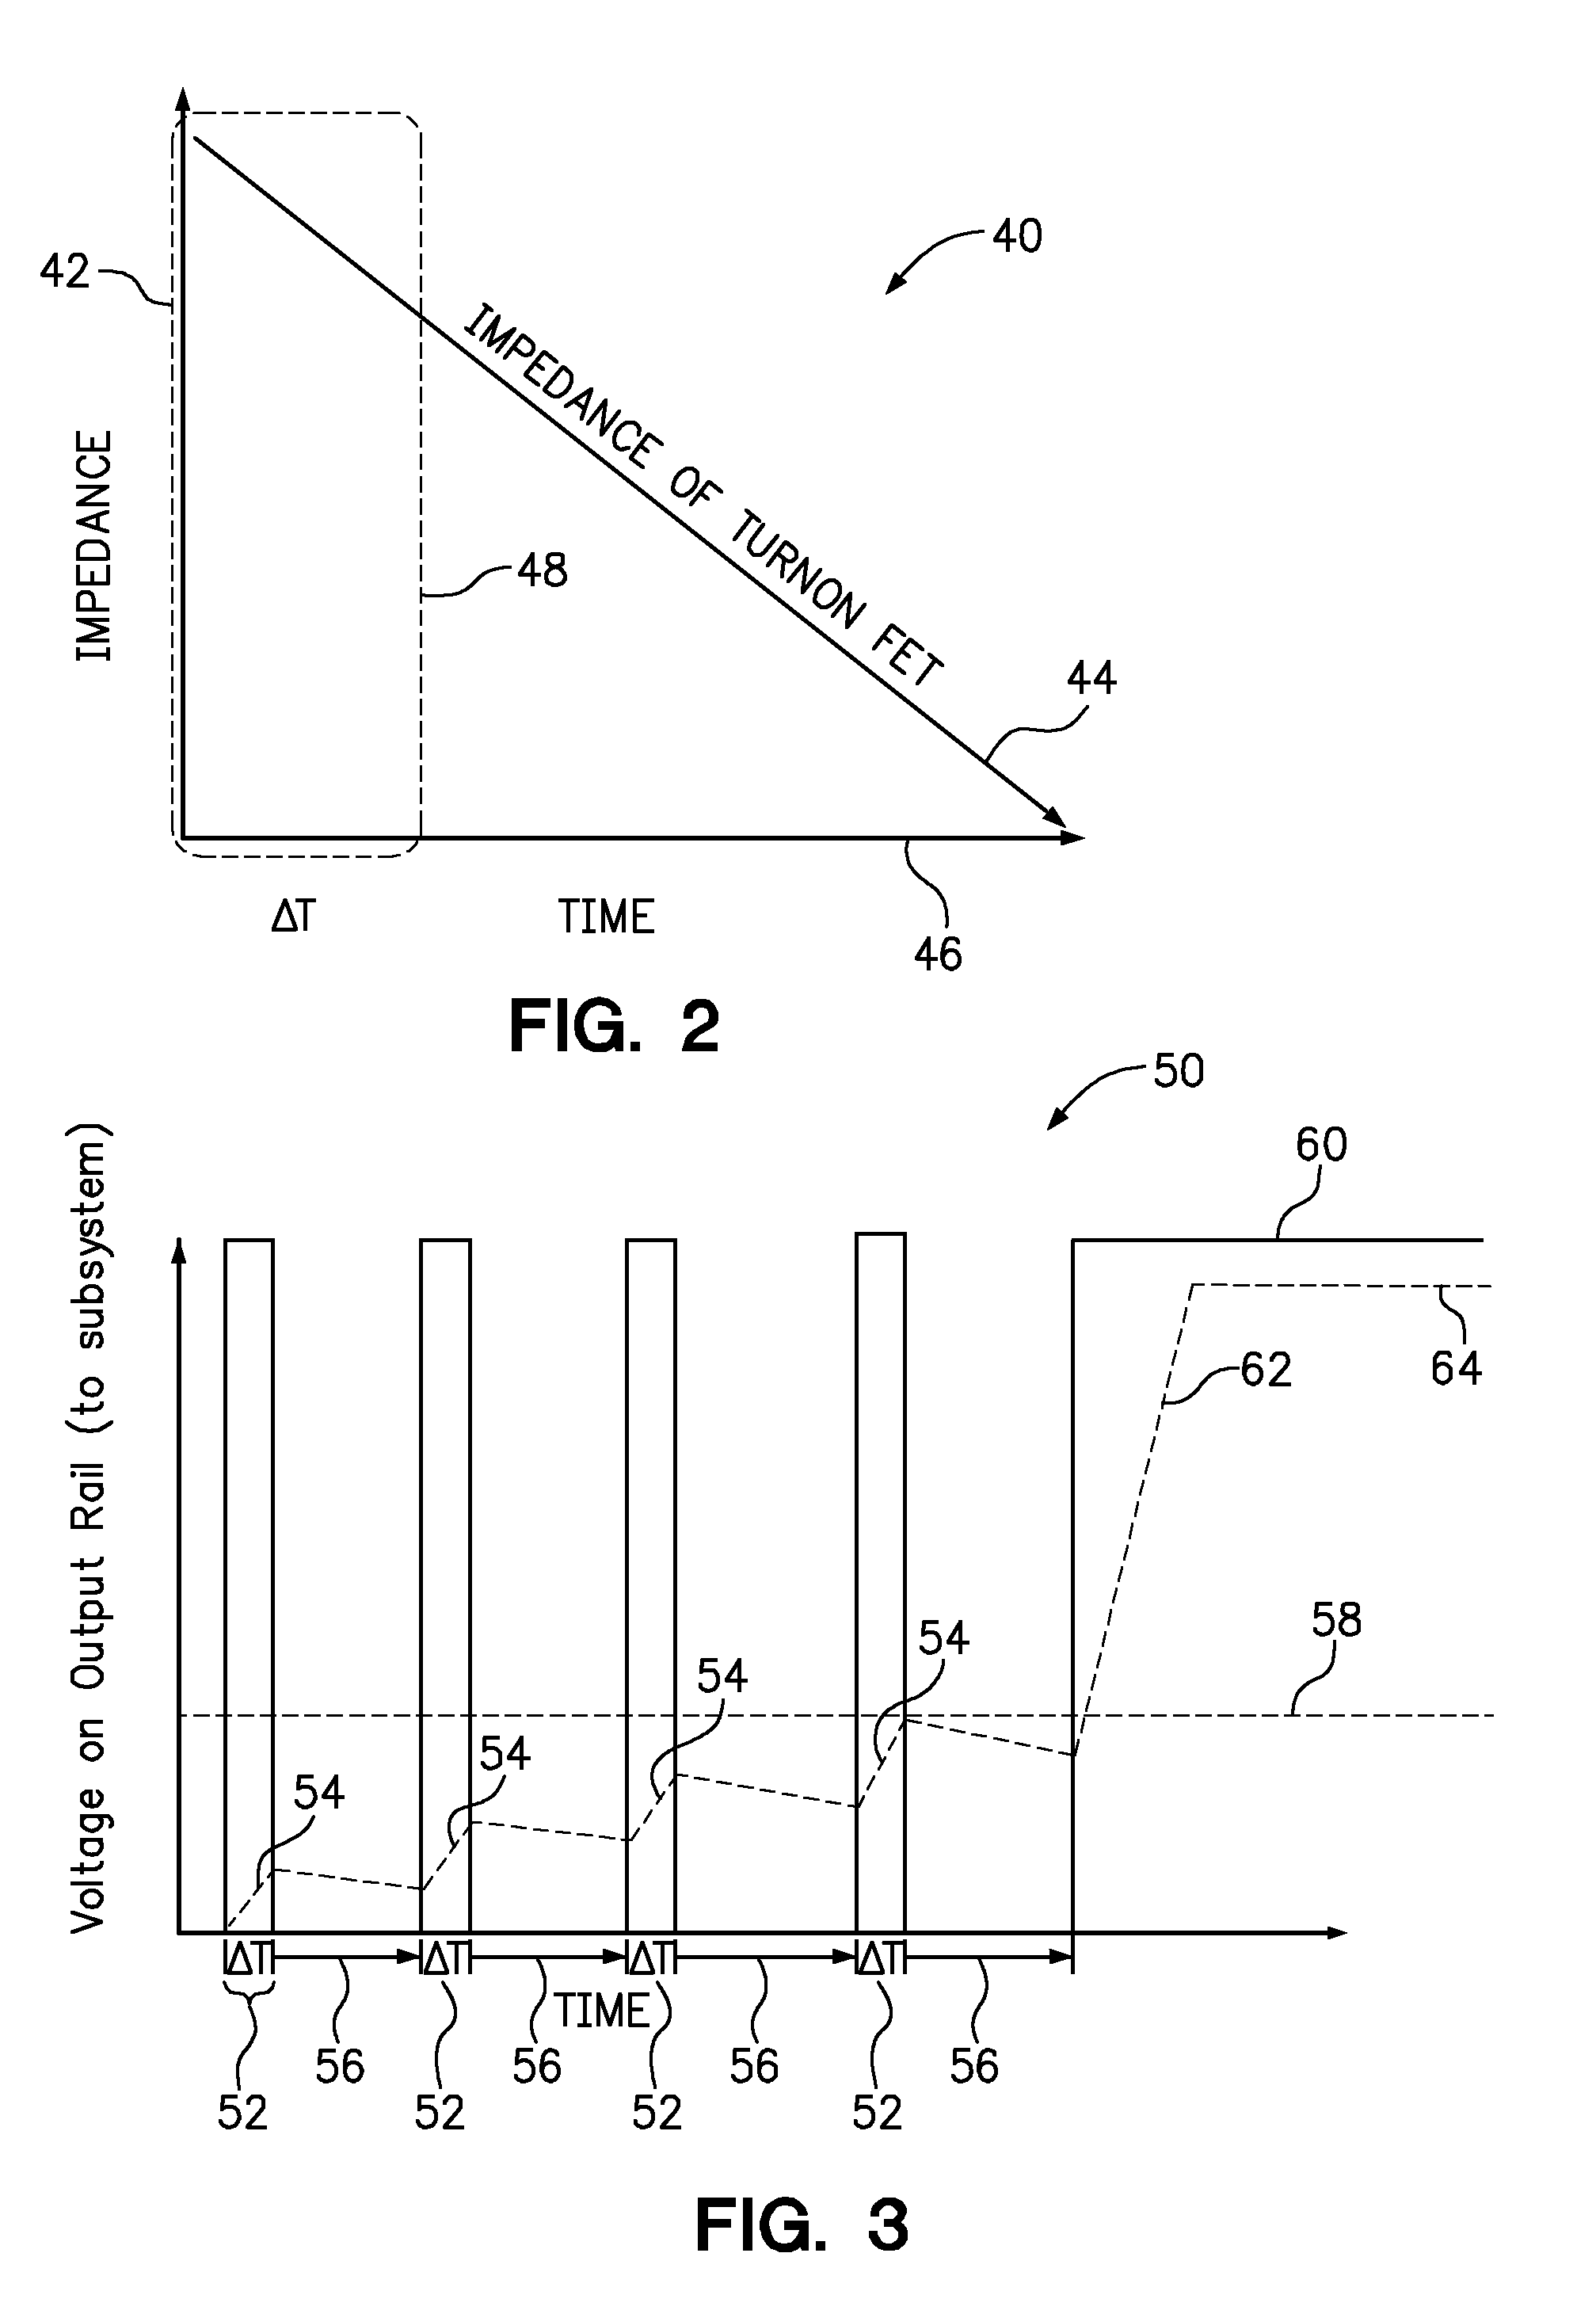 Controlling turn on FETs of a hot plug device